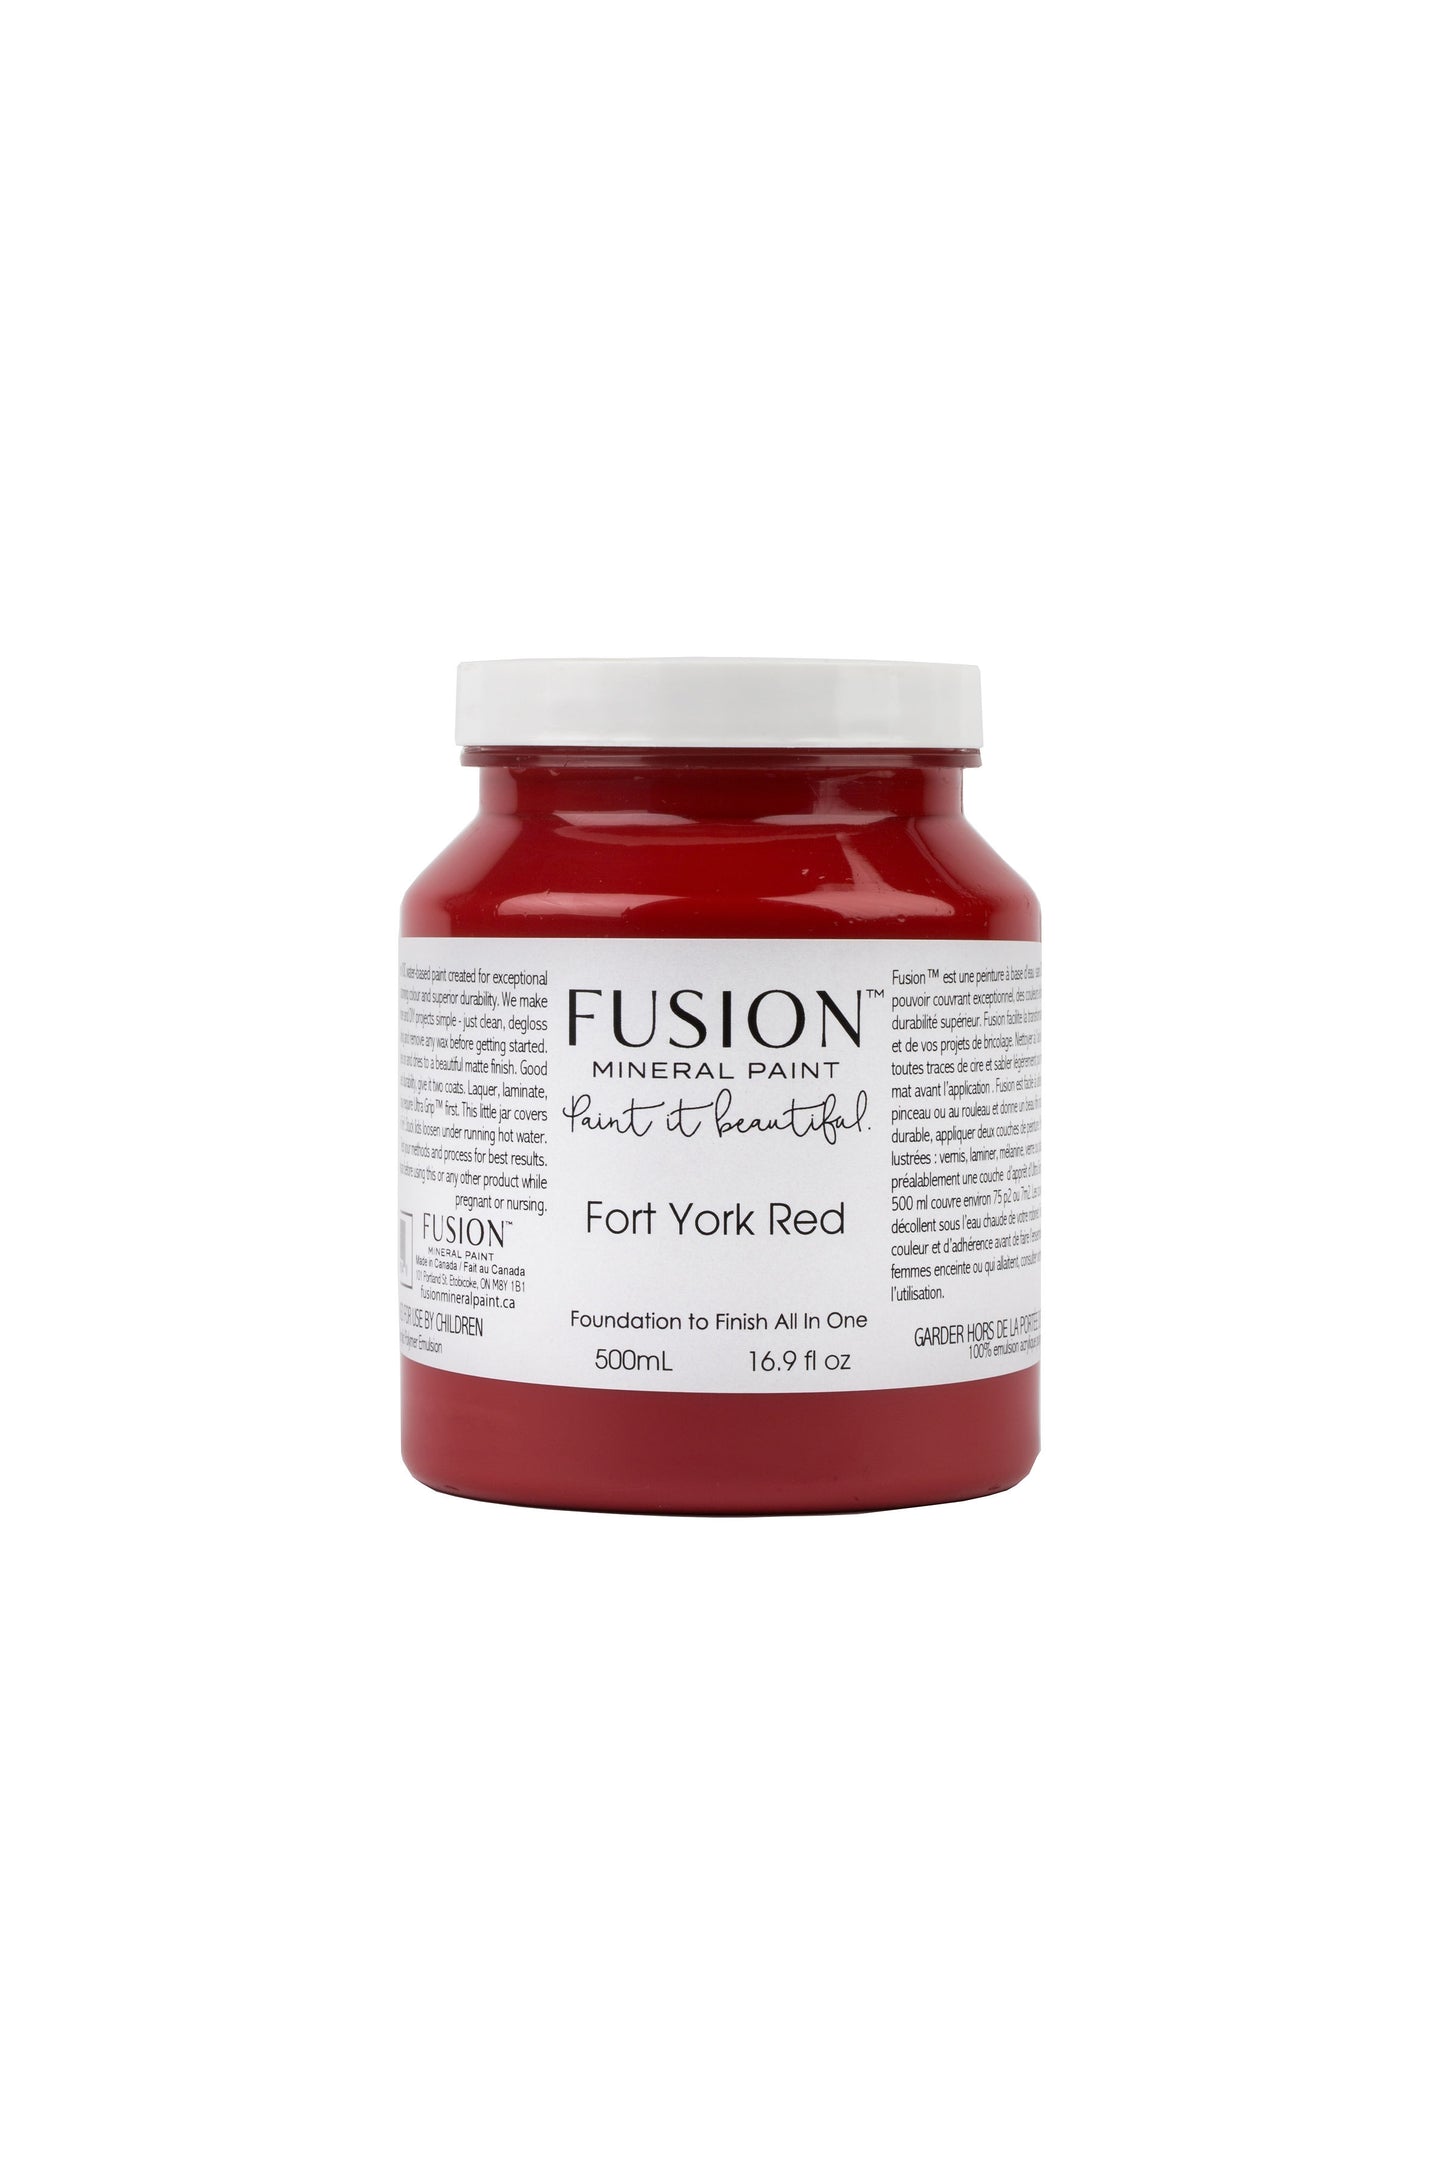 Fort York Red Fusion Mineral Paint, Deep Red Paint Color | 500ml Pint Size